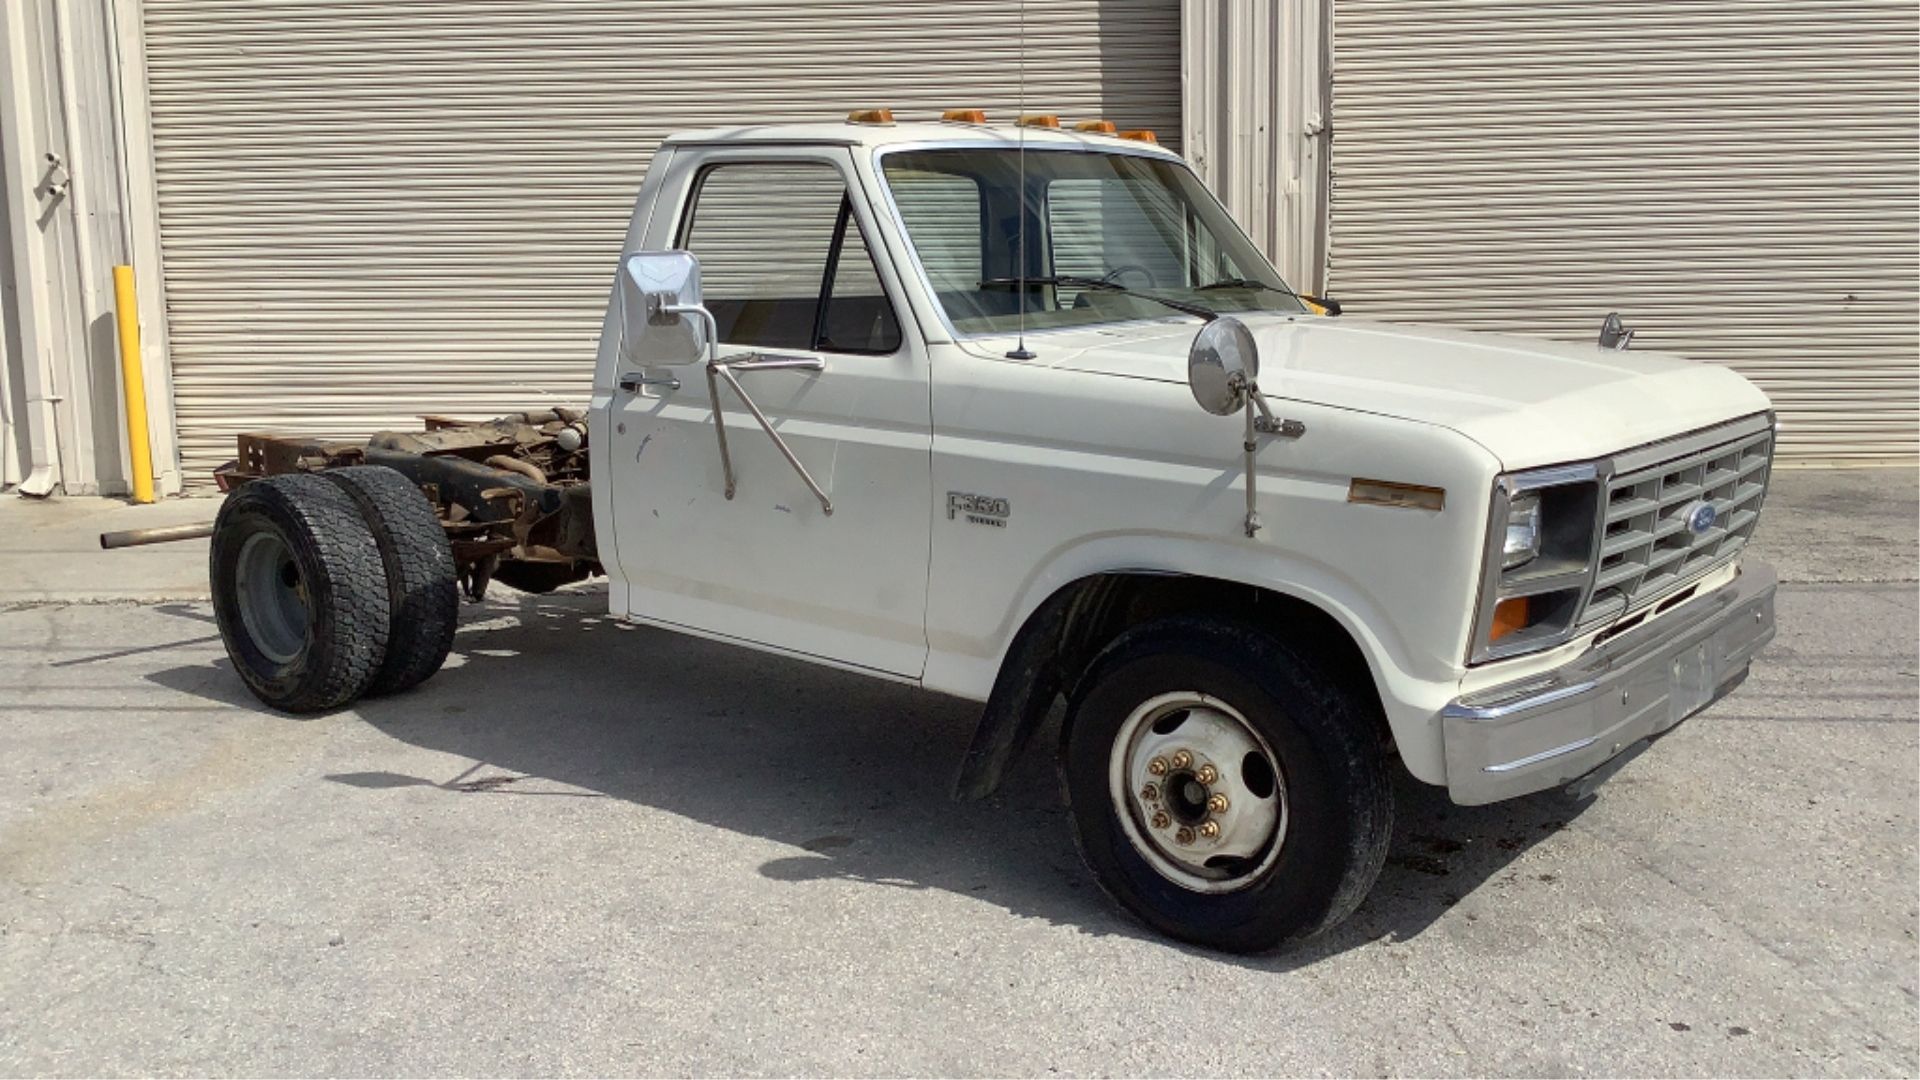 1985 Ford F-350 Regular Cab Chassis Truck 2WD - Image 4 of 83